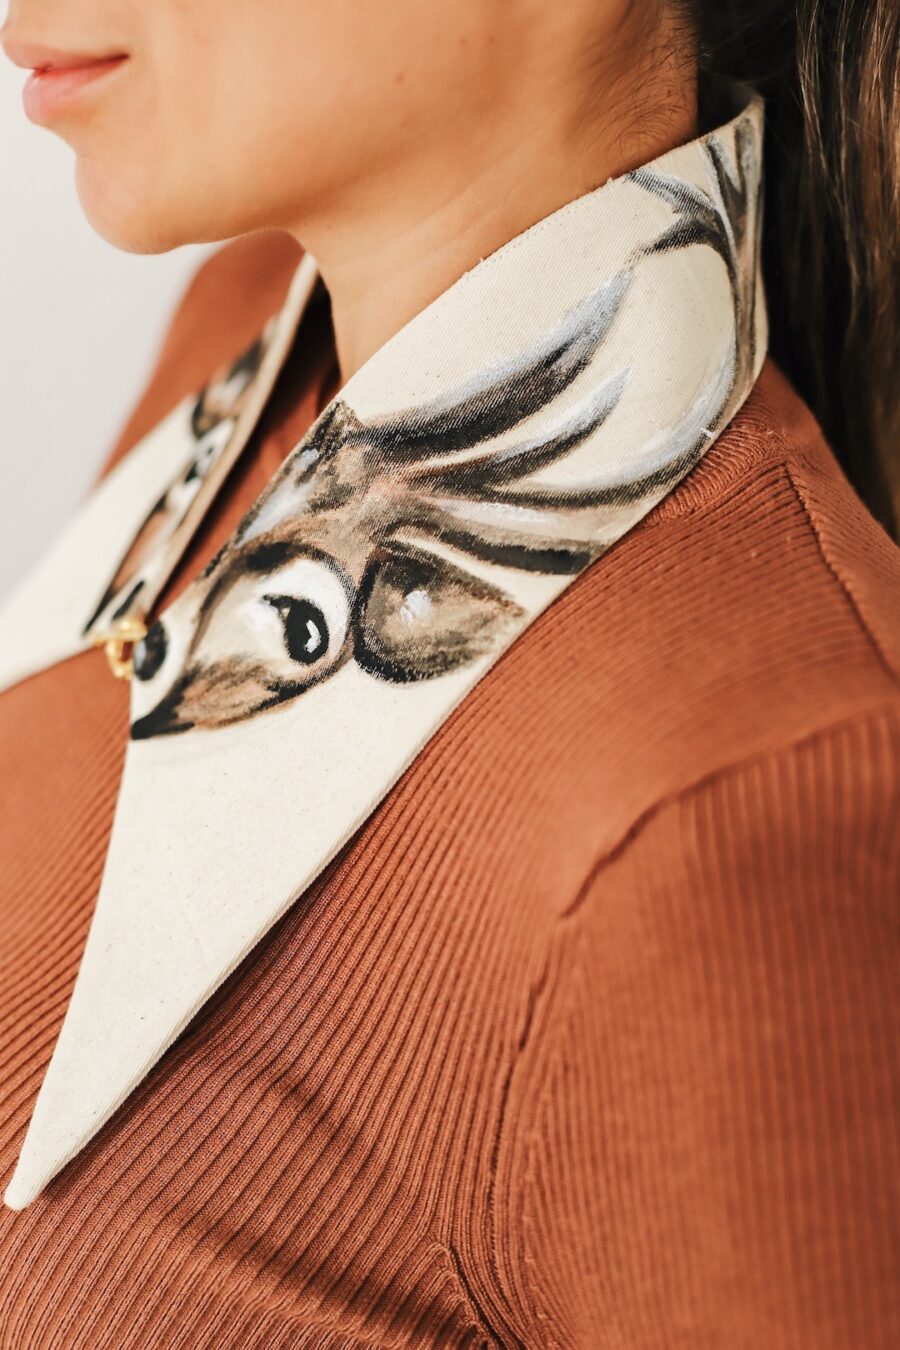 LongJudgeDeer designed by painting artist. It is an art accessory with animal figure pattern organic cotton